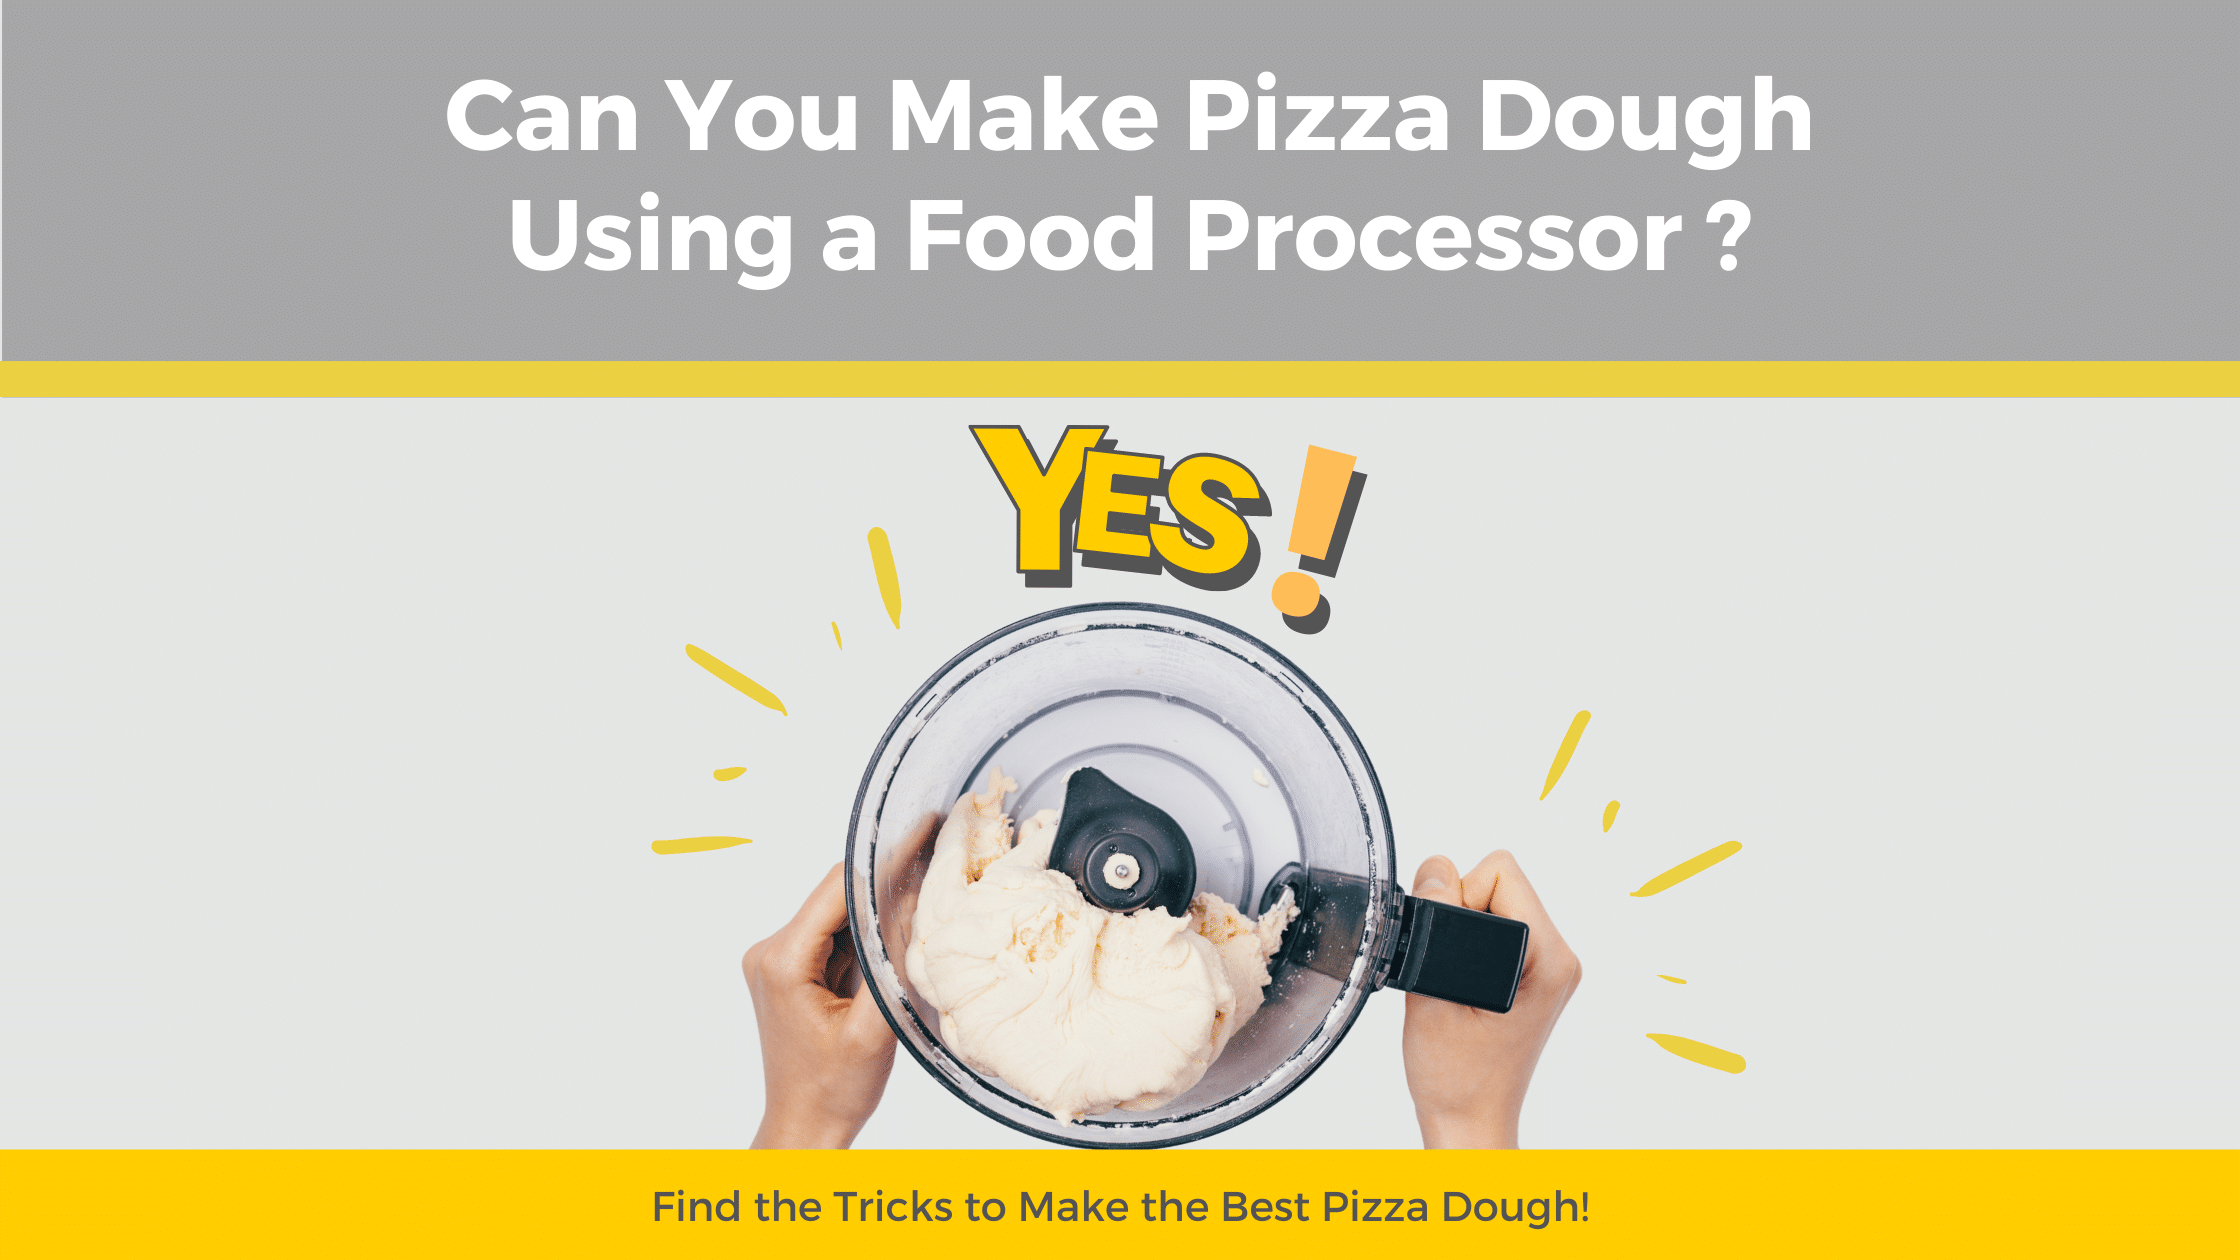 Can You Use a Food Processor to Make Pizza Dough? Here’s What You Need to Know